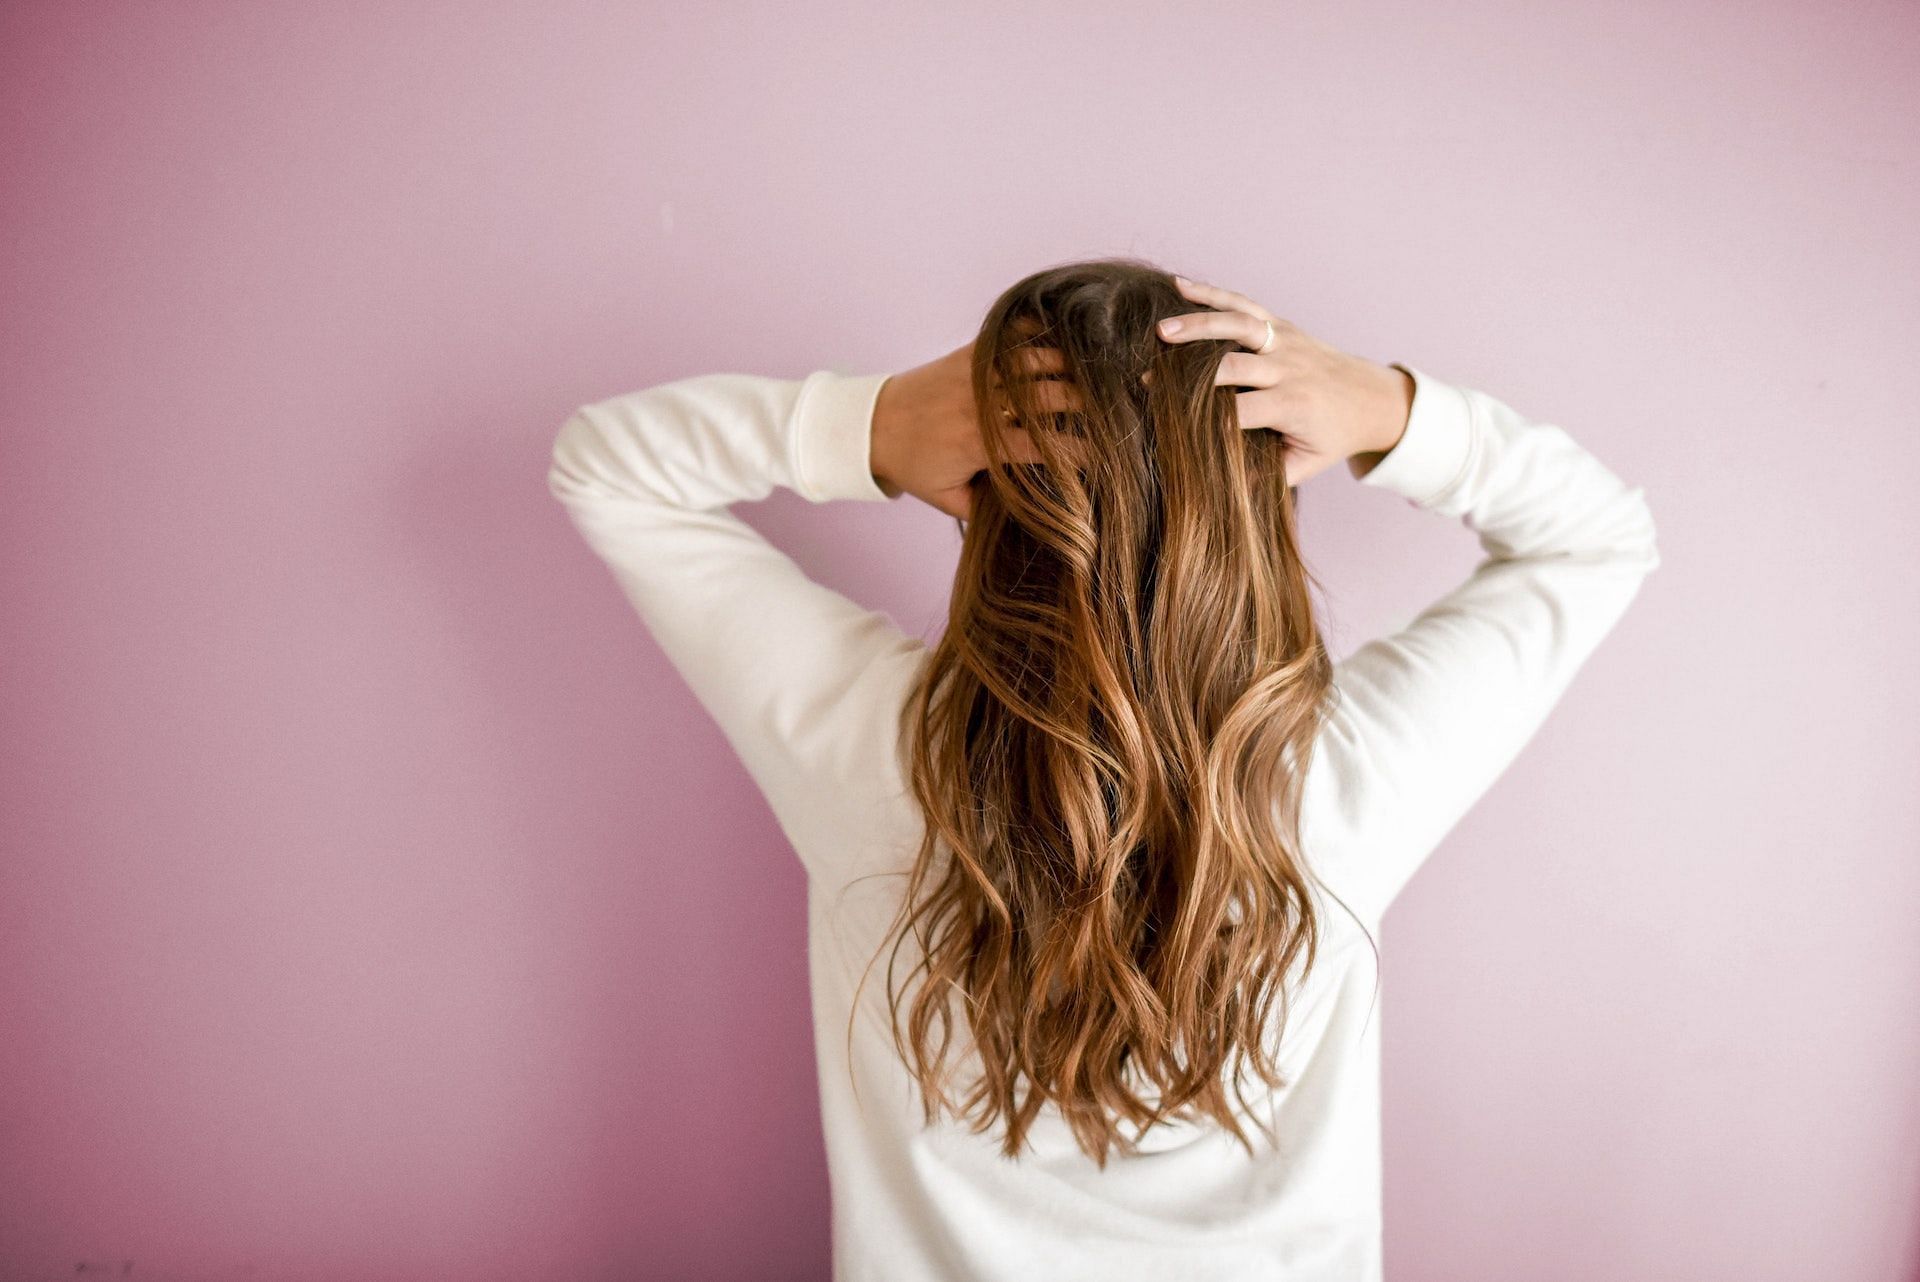 Kaolin clay offers several benefits to hair. (Photo via Pexels/Element5 Digital)